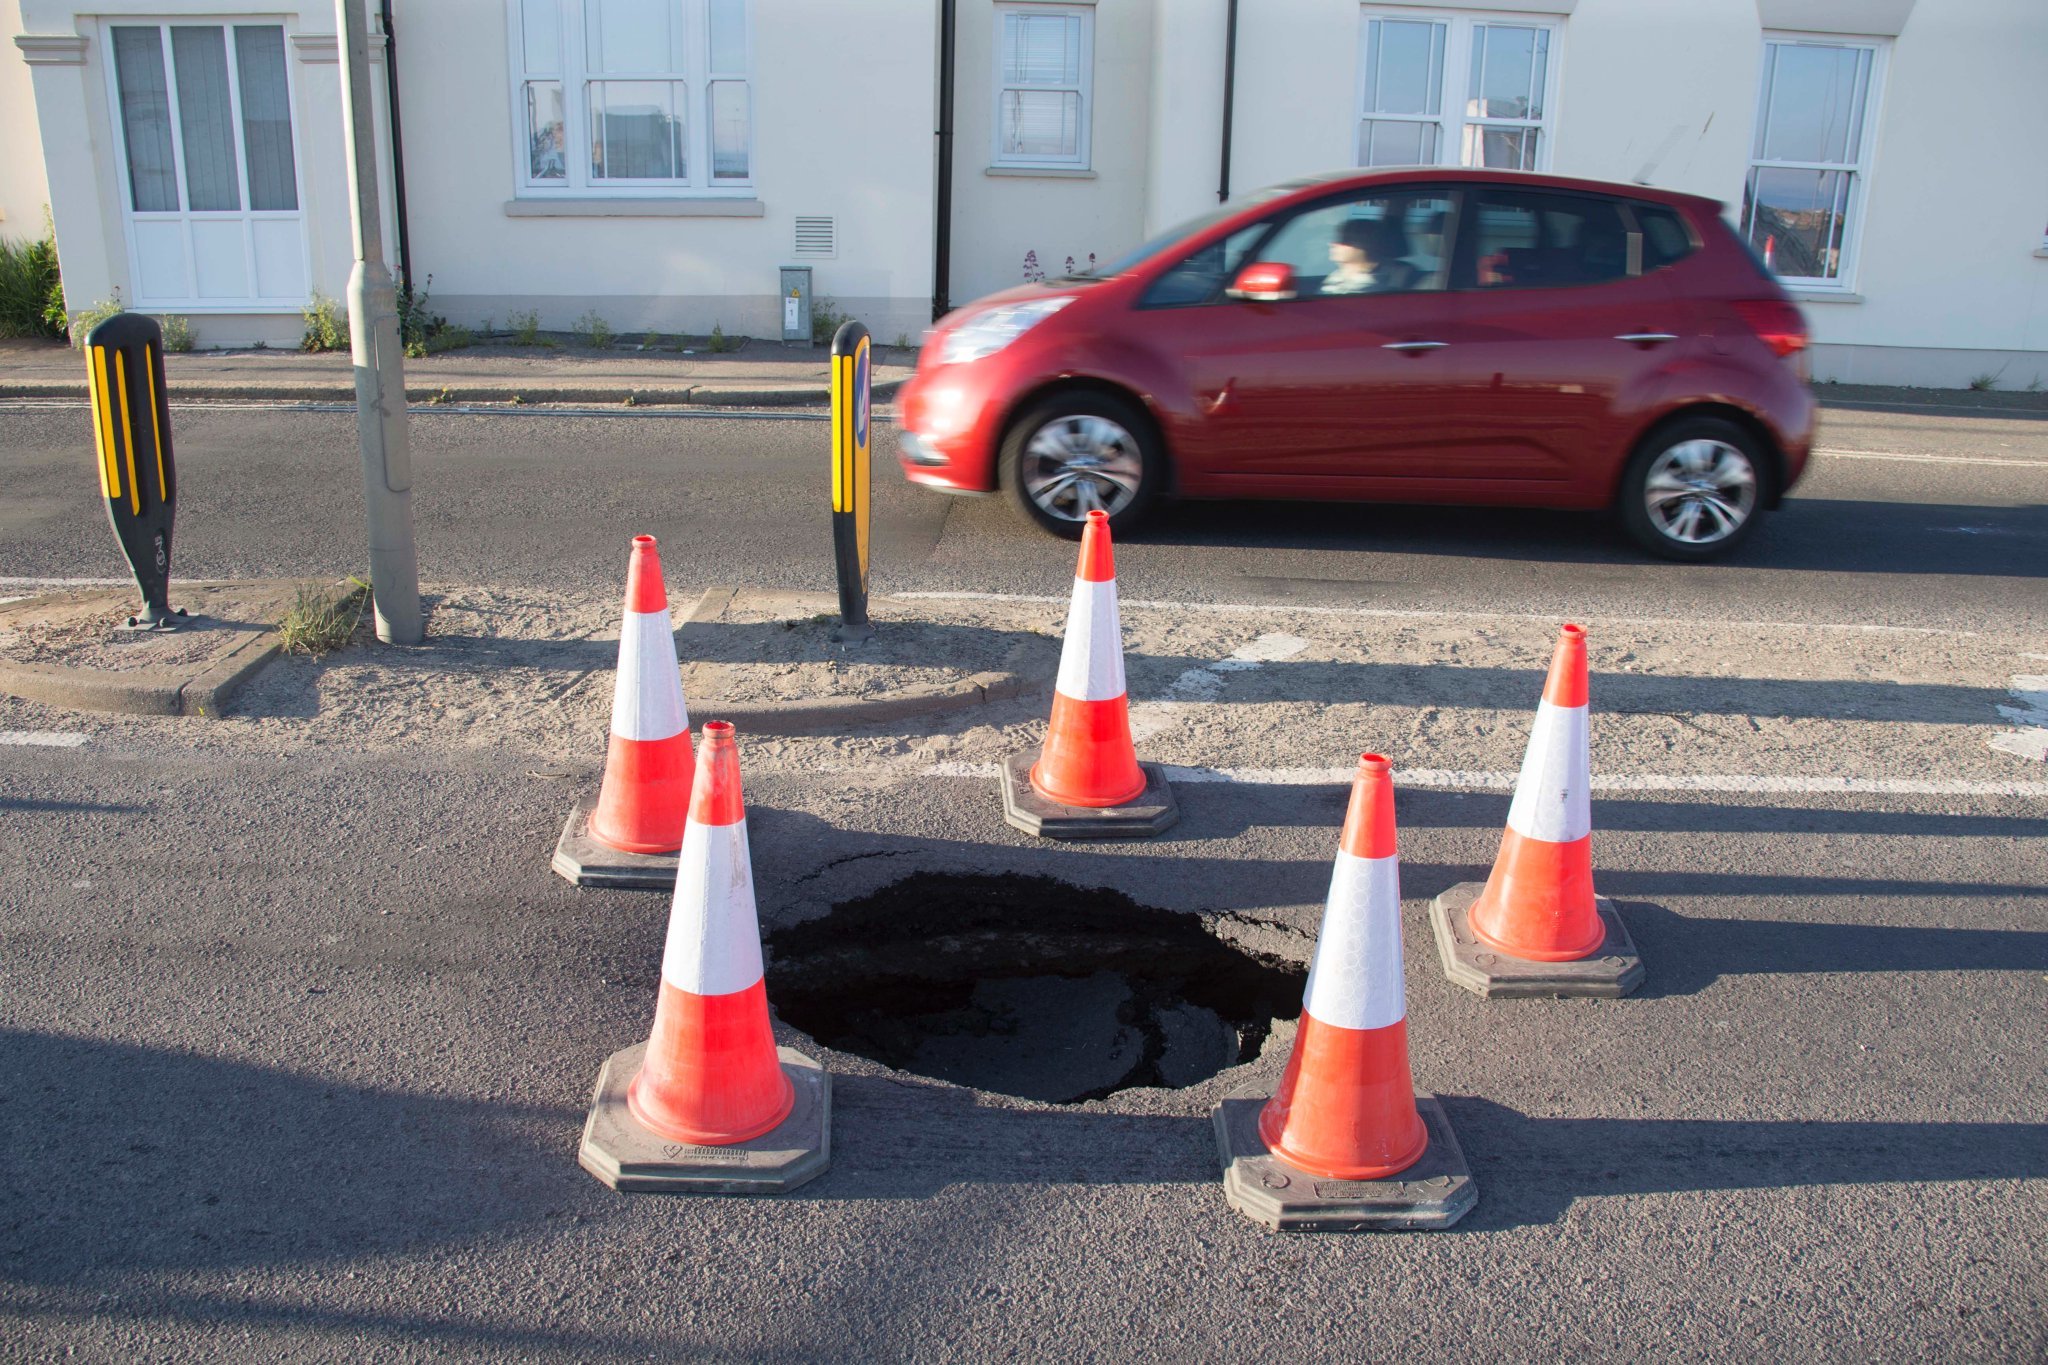 Large Sinkhole Opens Up On A259 In Portslade The Argus